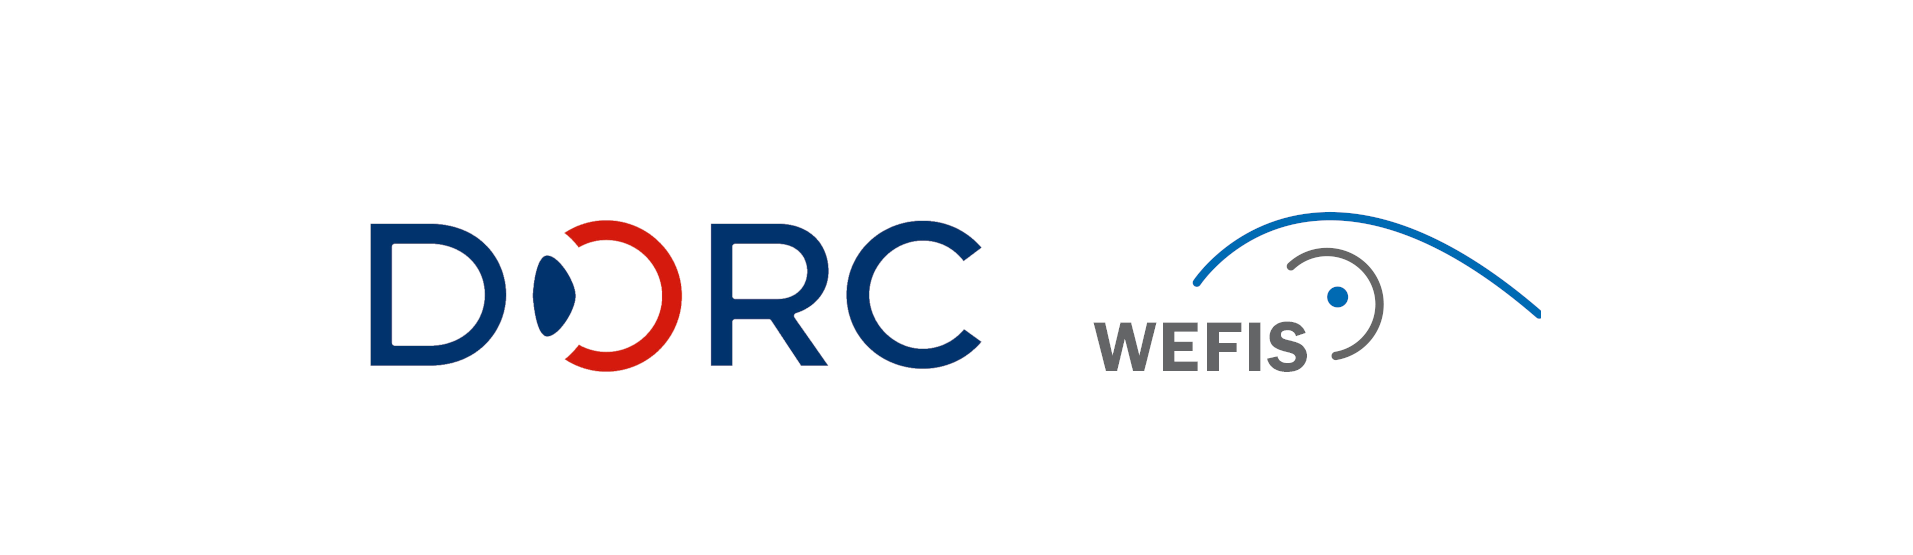 DORC announces strategic partnership with WEFIS GmbH for research and development of innovative ophthalmic instruments based on an equity investment